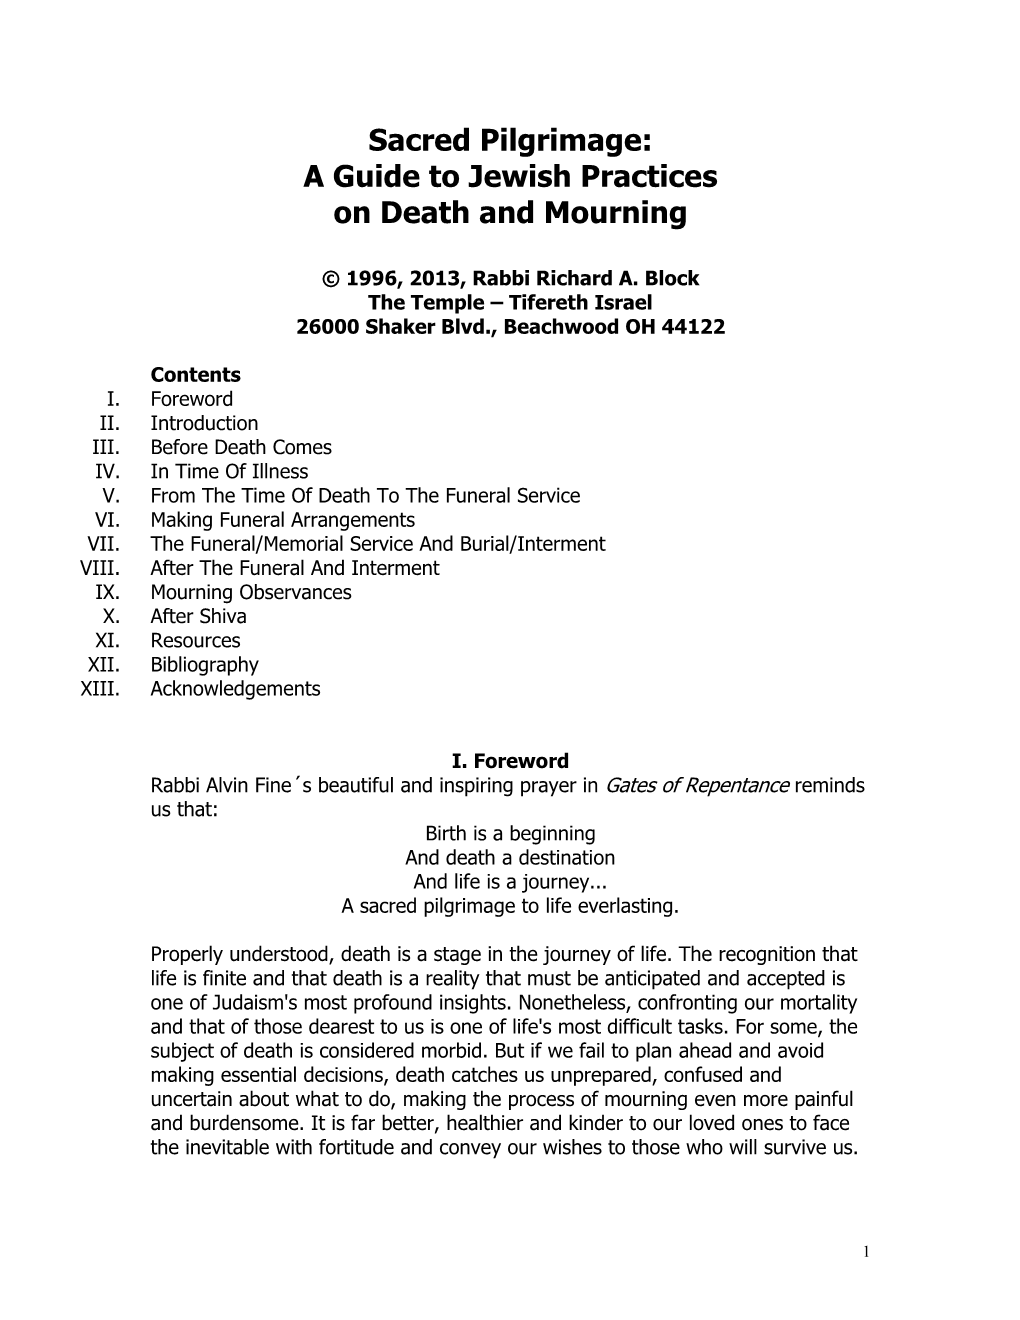 Sacred Pilgrimage: a Guide to Jewish Practices on Death and Mourning